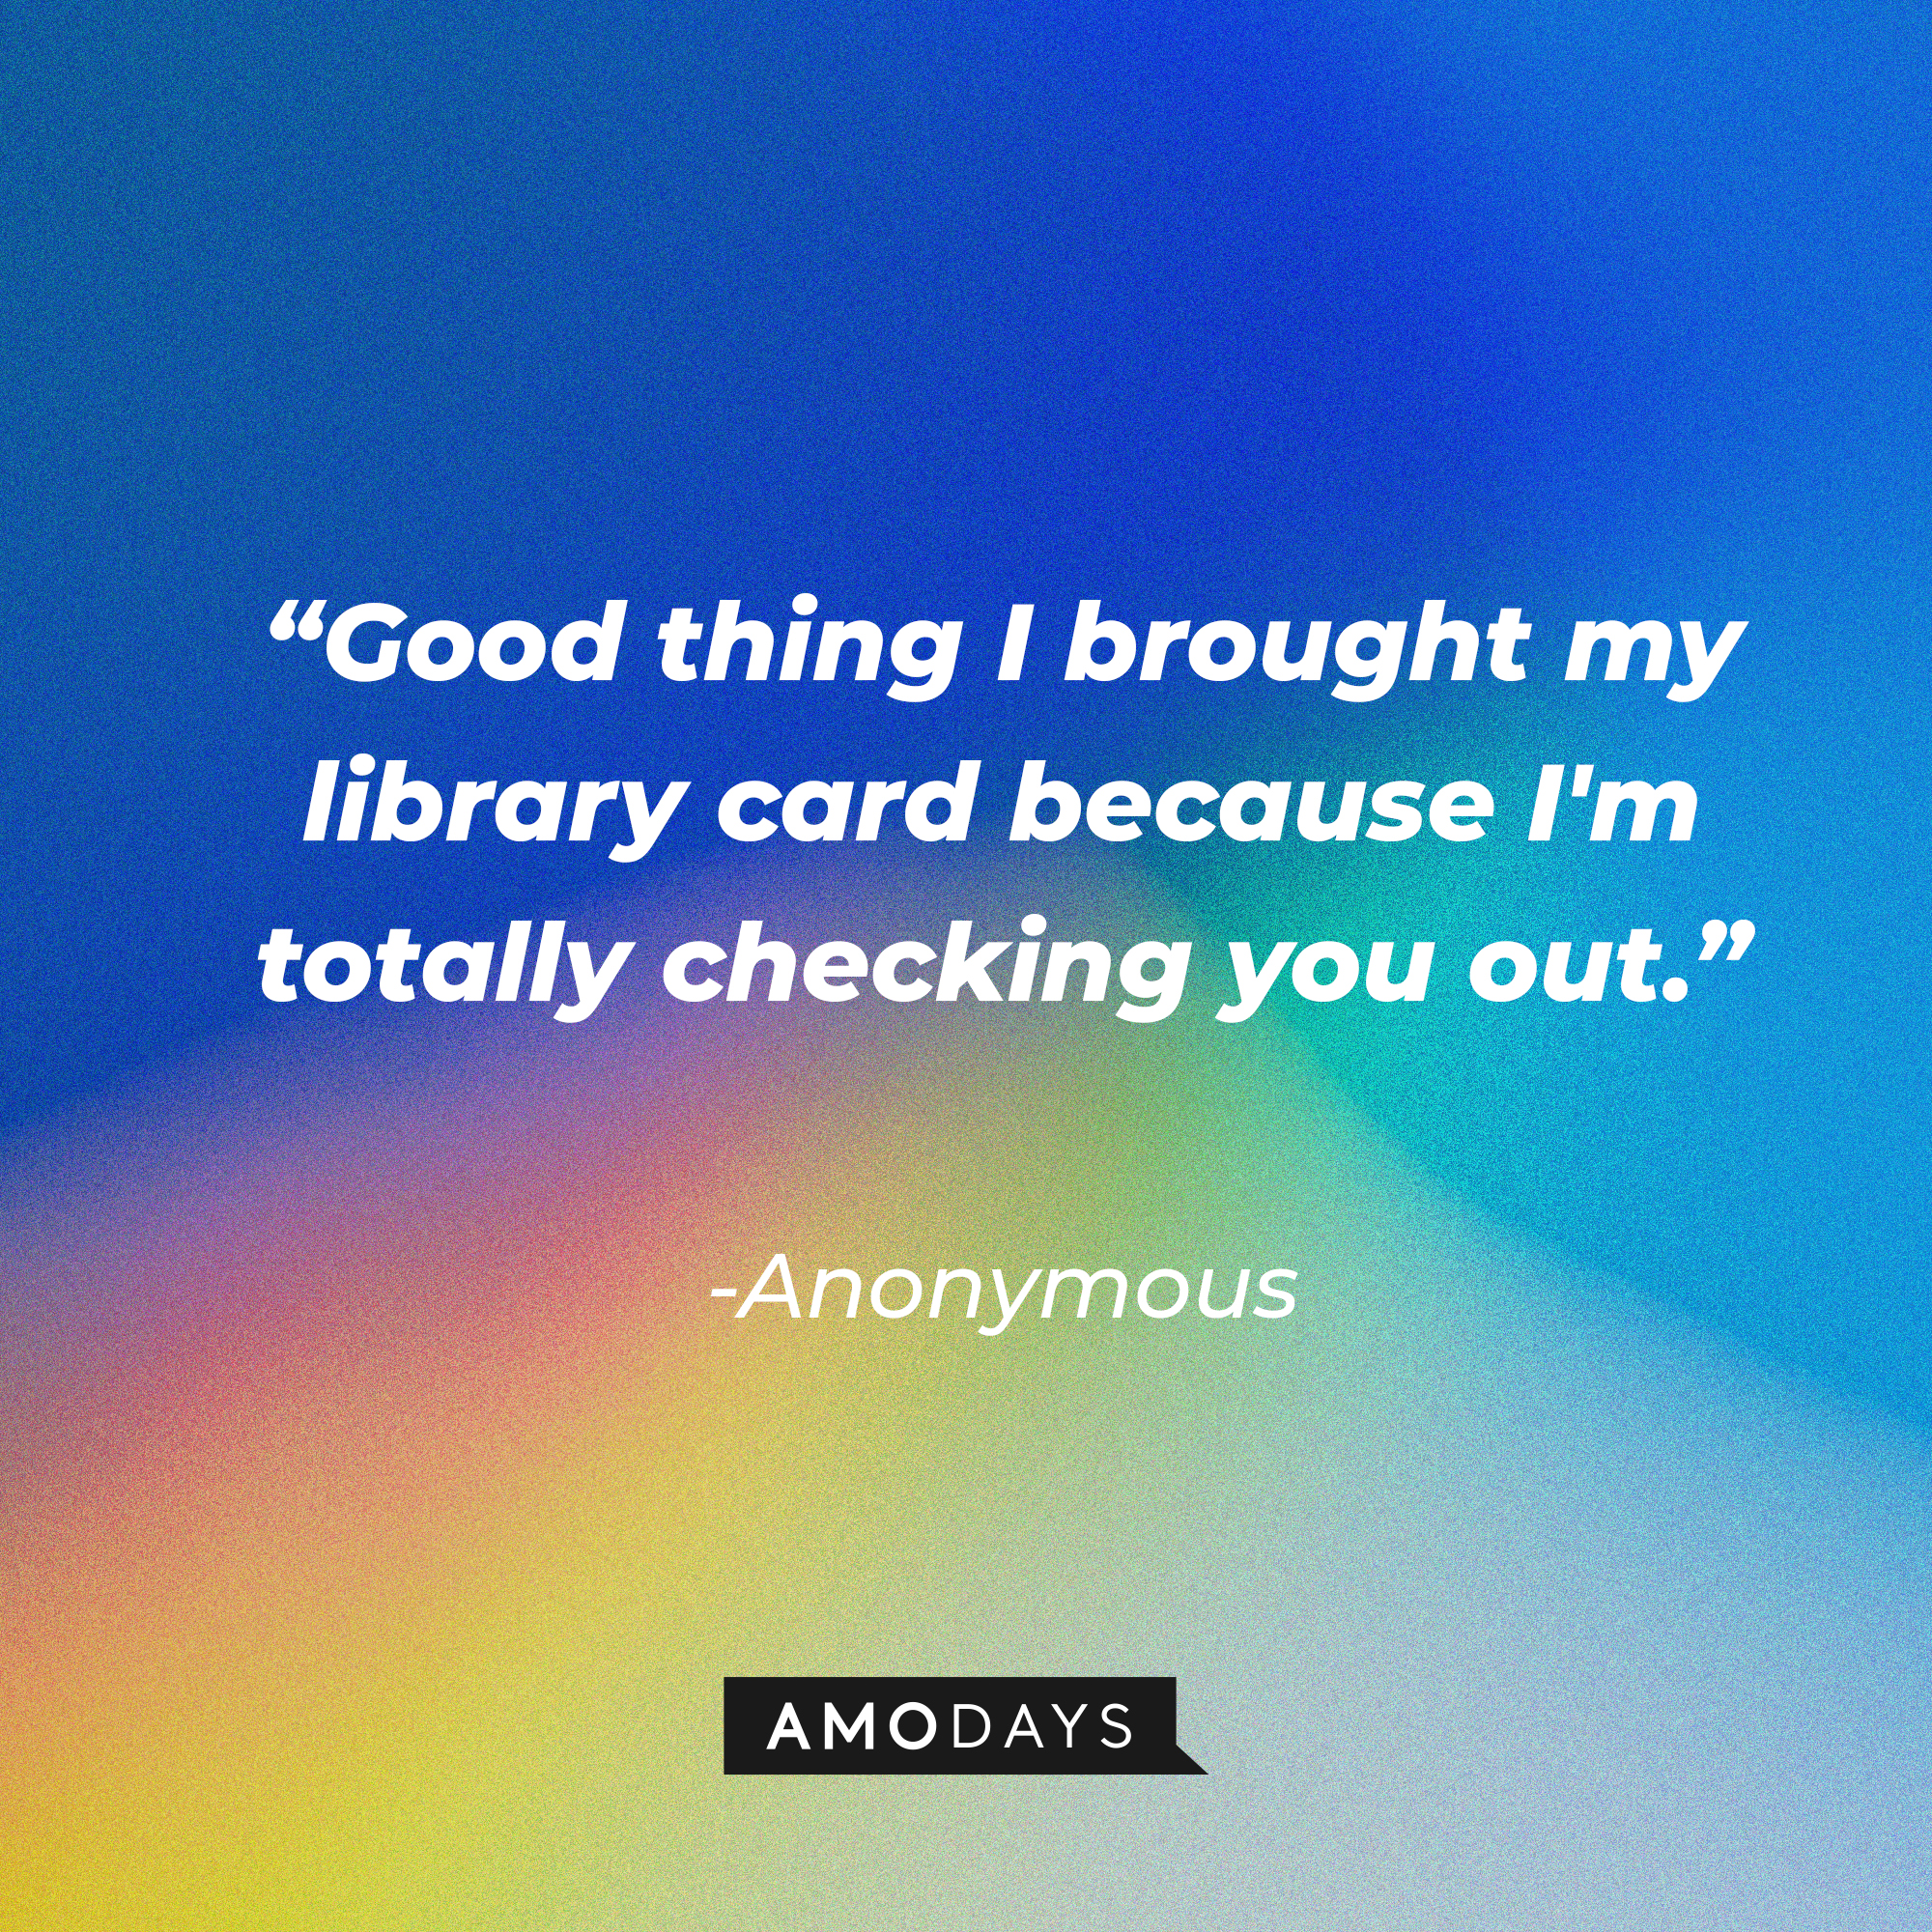 Anonymous quote: “Good thing I brought my library card because I'm totally checking you out.” | Source: Amodays